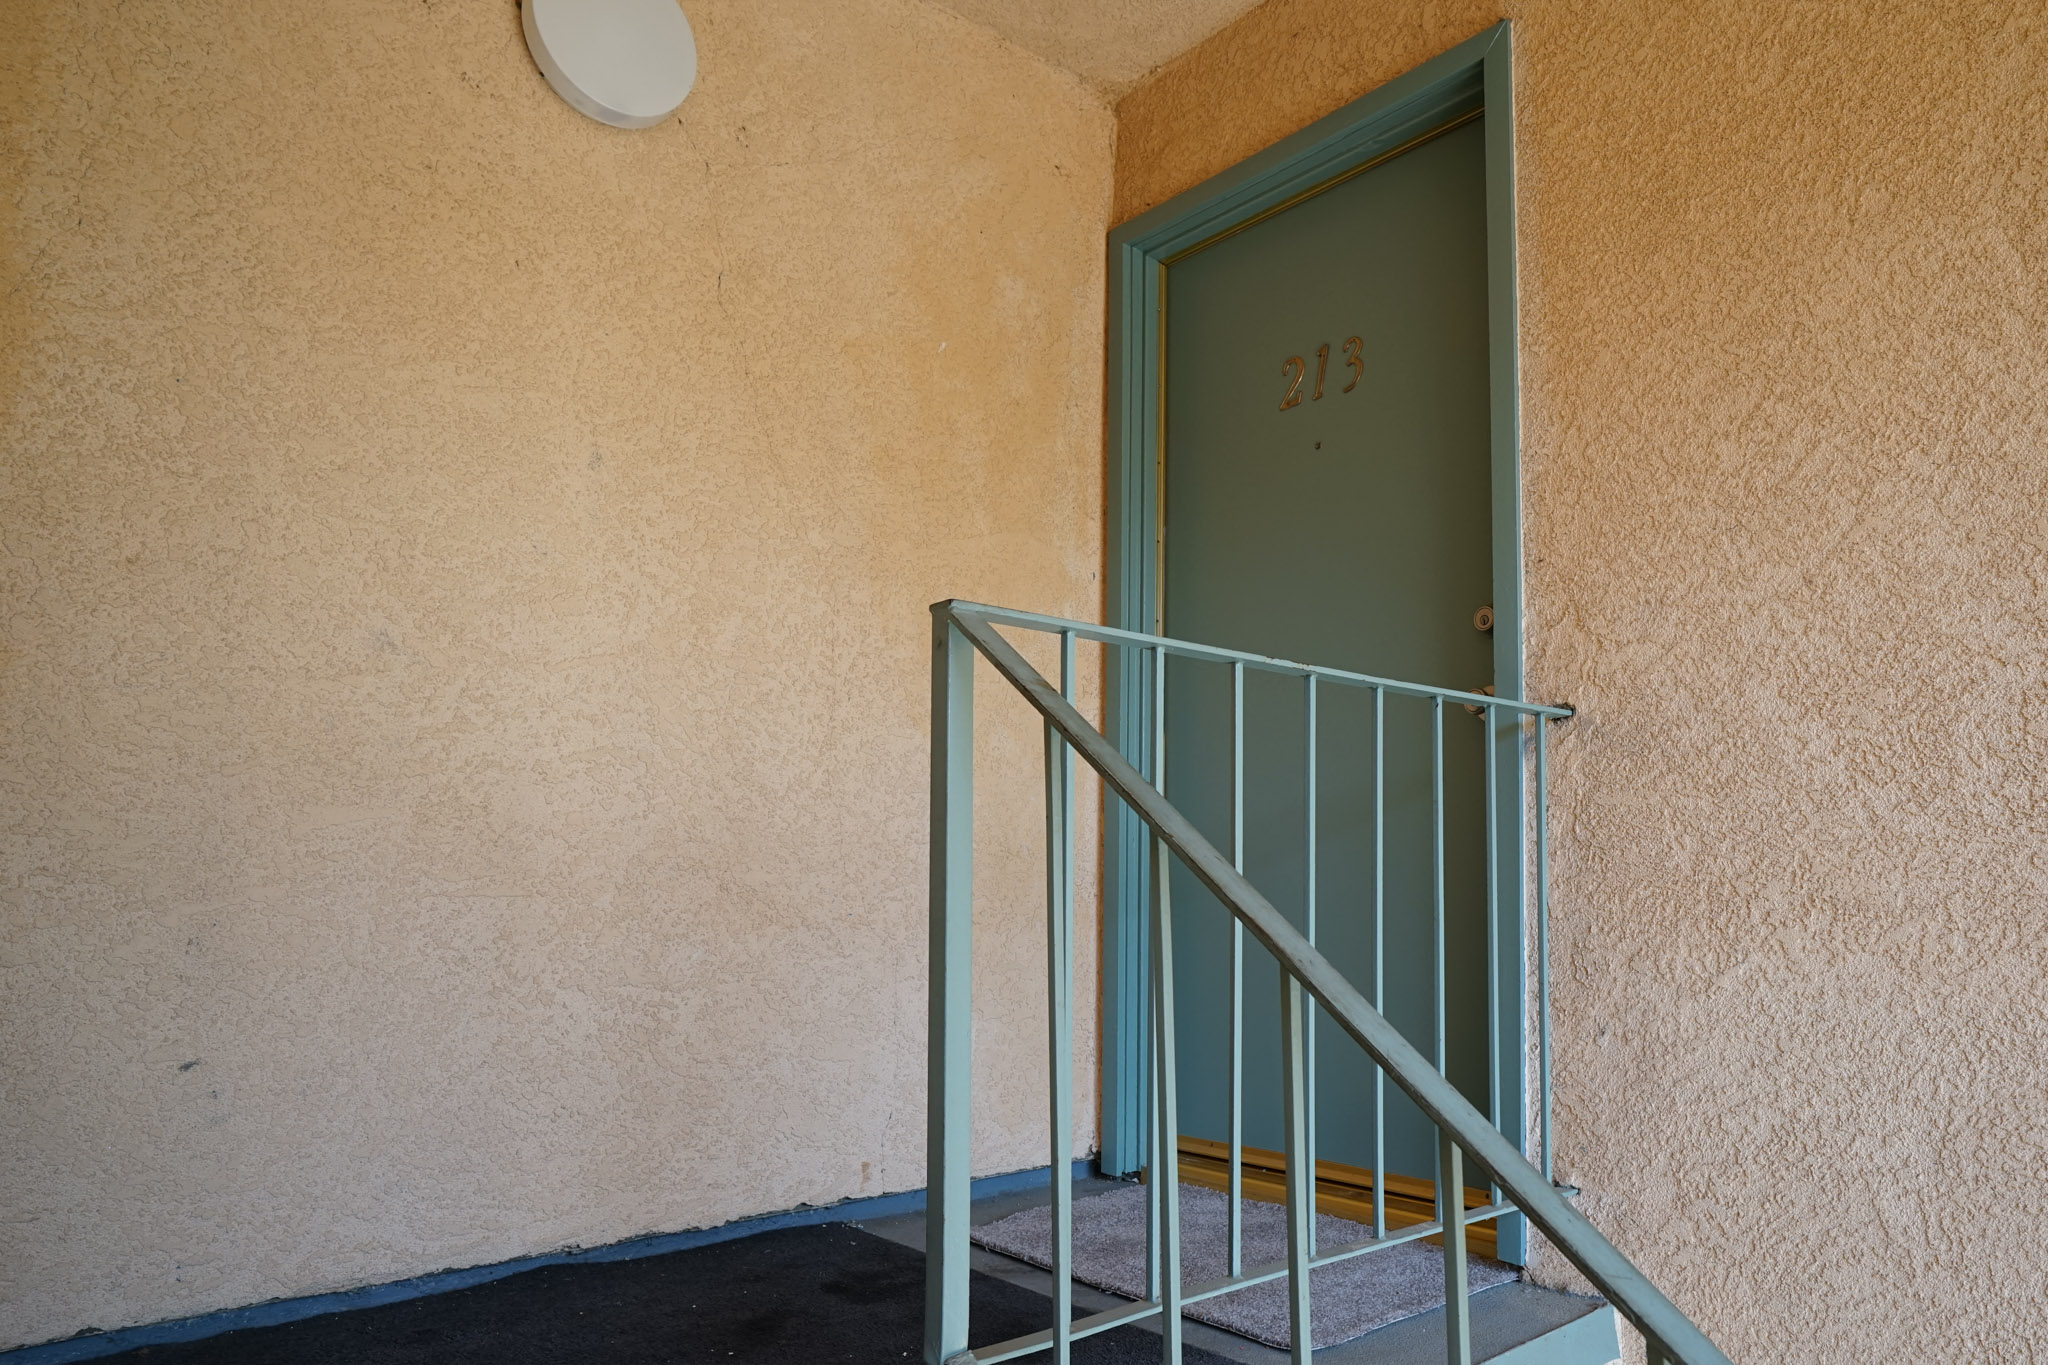 View of a unit's door that has a railing on the side.